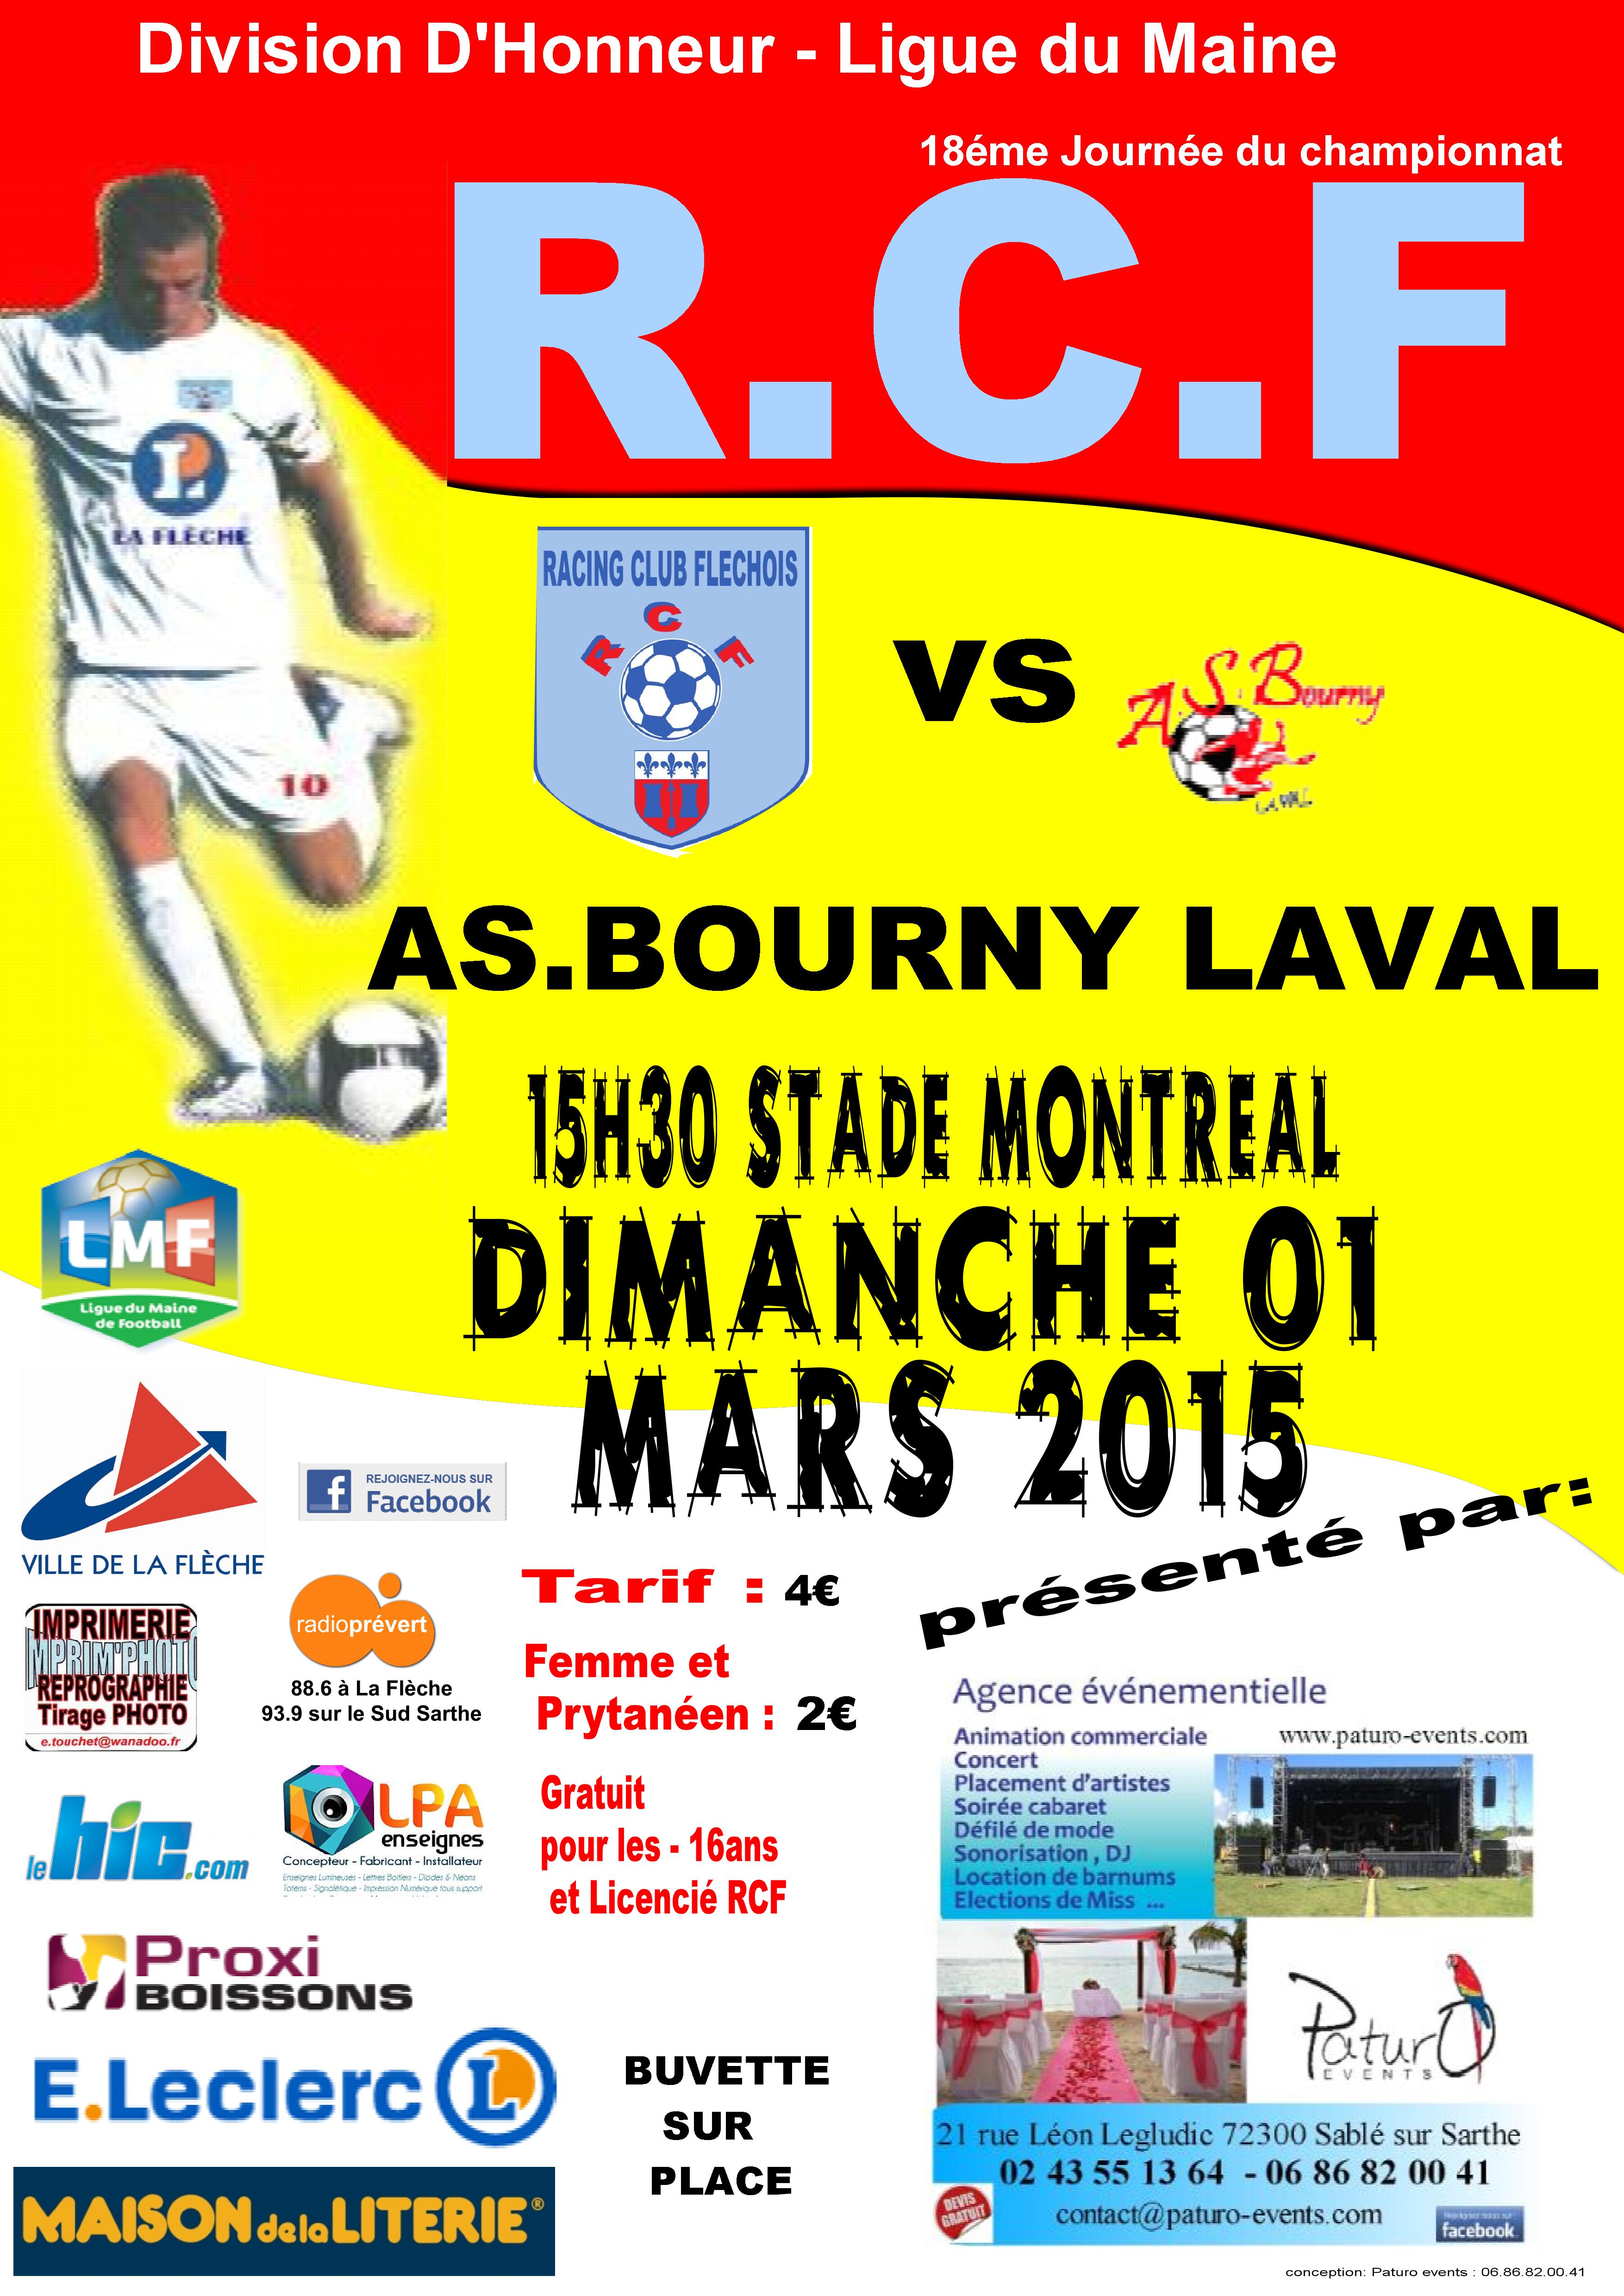 AFFICHE FOOT AS BOURNY